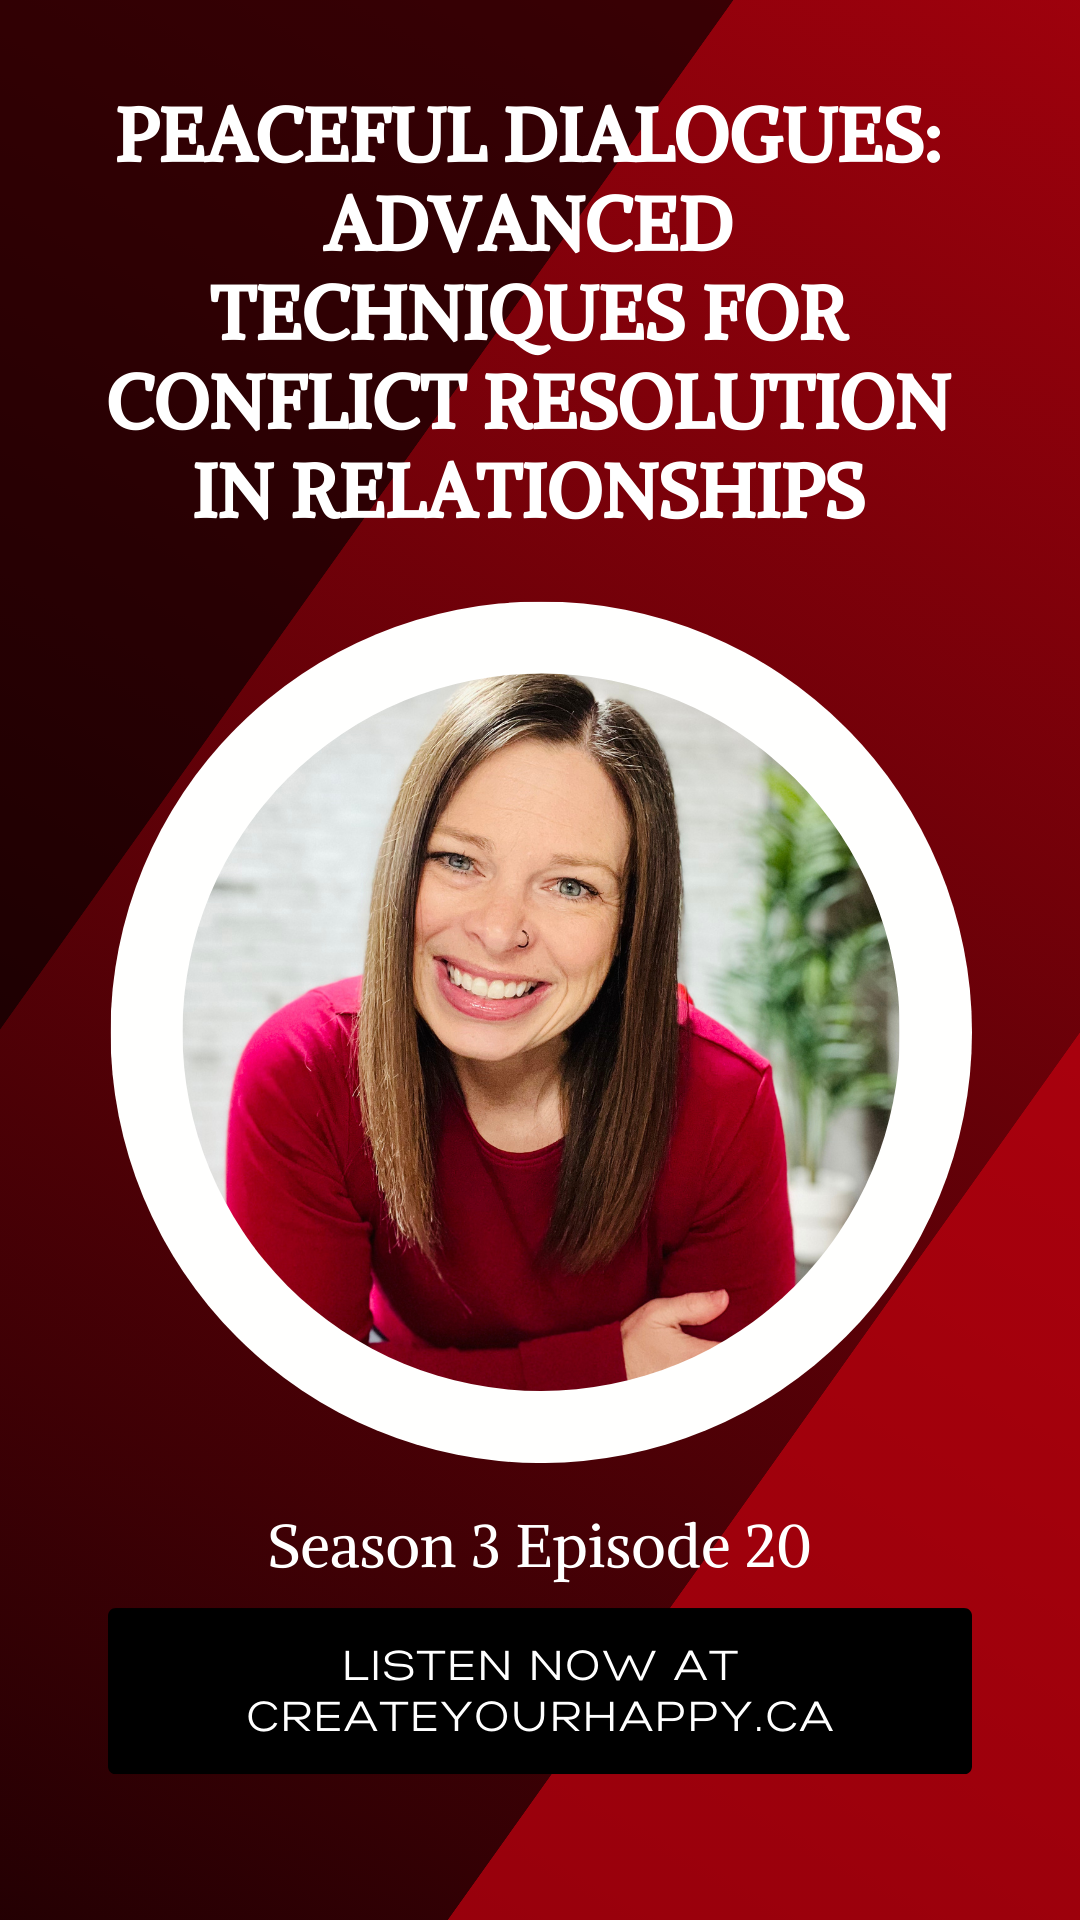 Explore effective conflict resolution strategies for navigating challenges with grace and understanding your emotional triggers to foster deeper connections and personal growth.